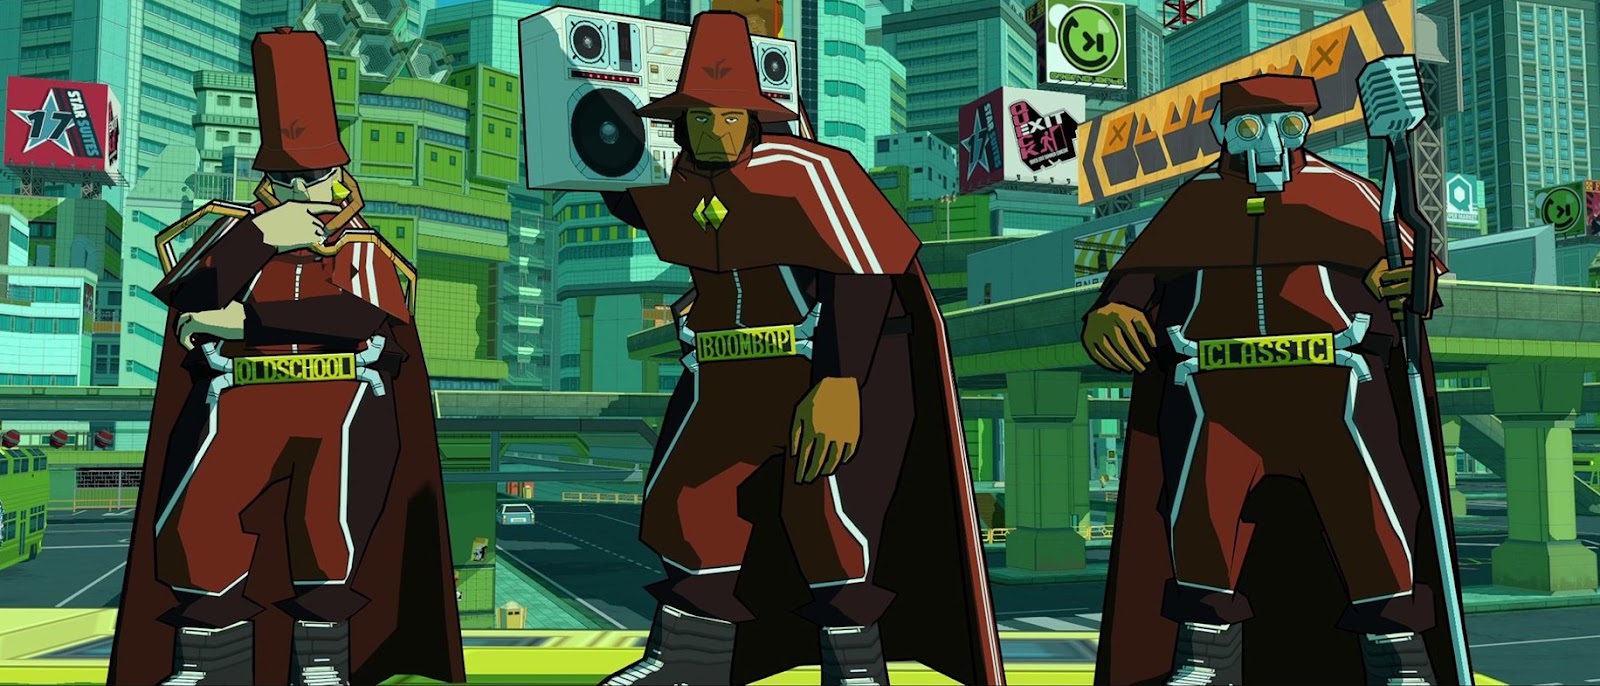 The Oldheads, a crew in Bomb Rush Cyberfunk, wearing maroon capes and wielding various musical items like a microphone and boombox in a green city.